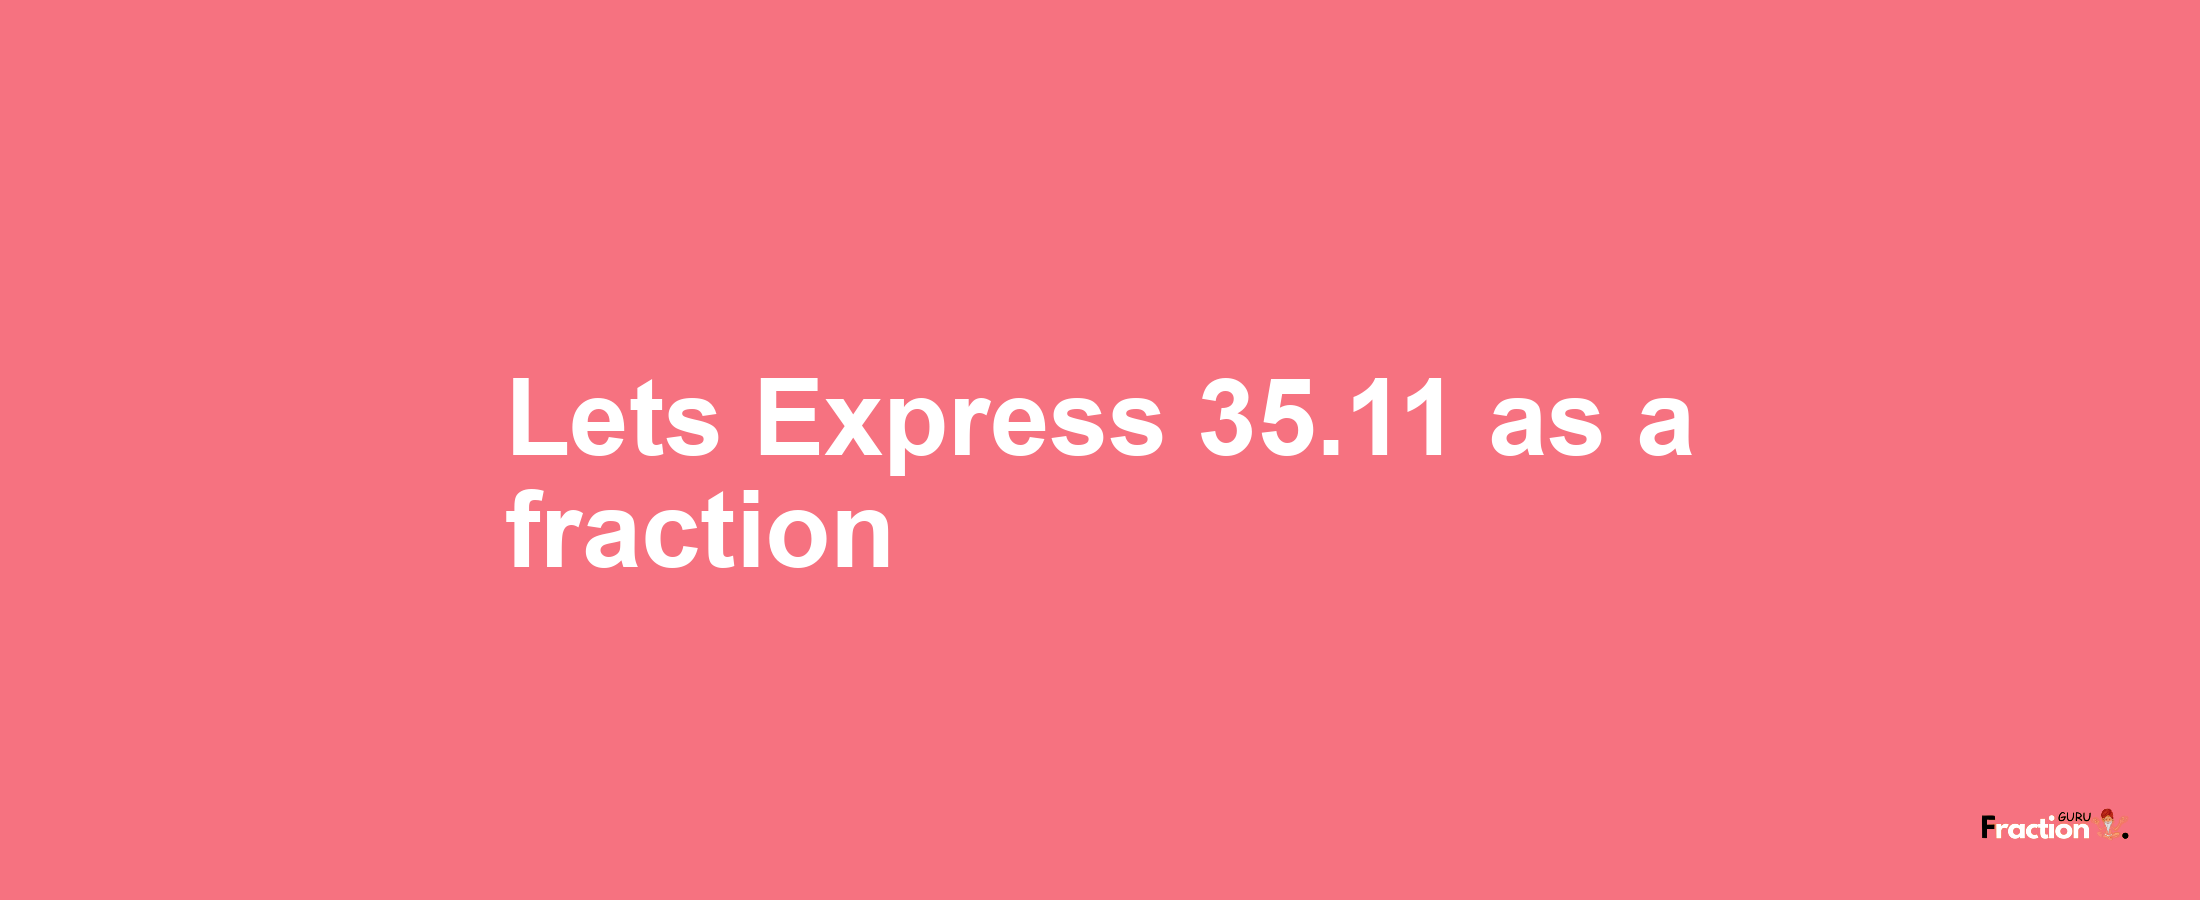 Lets Express 35.11 as afraction